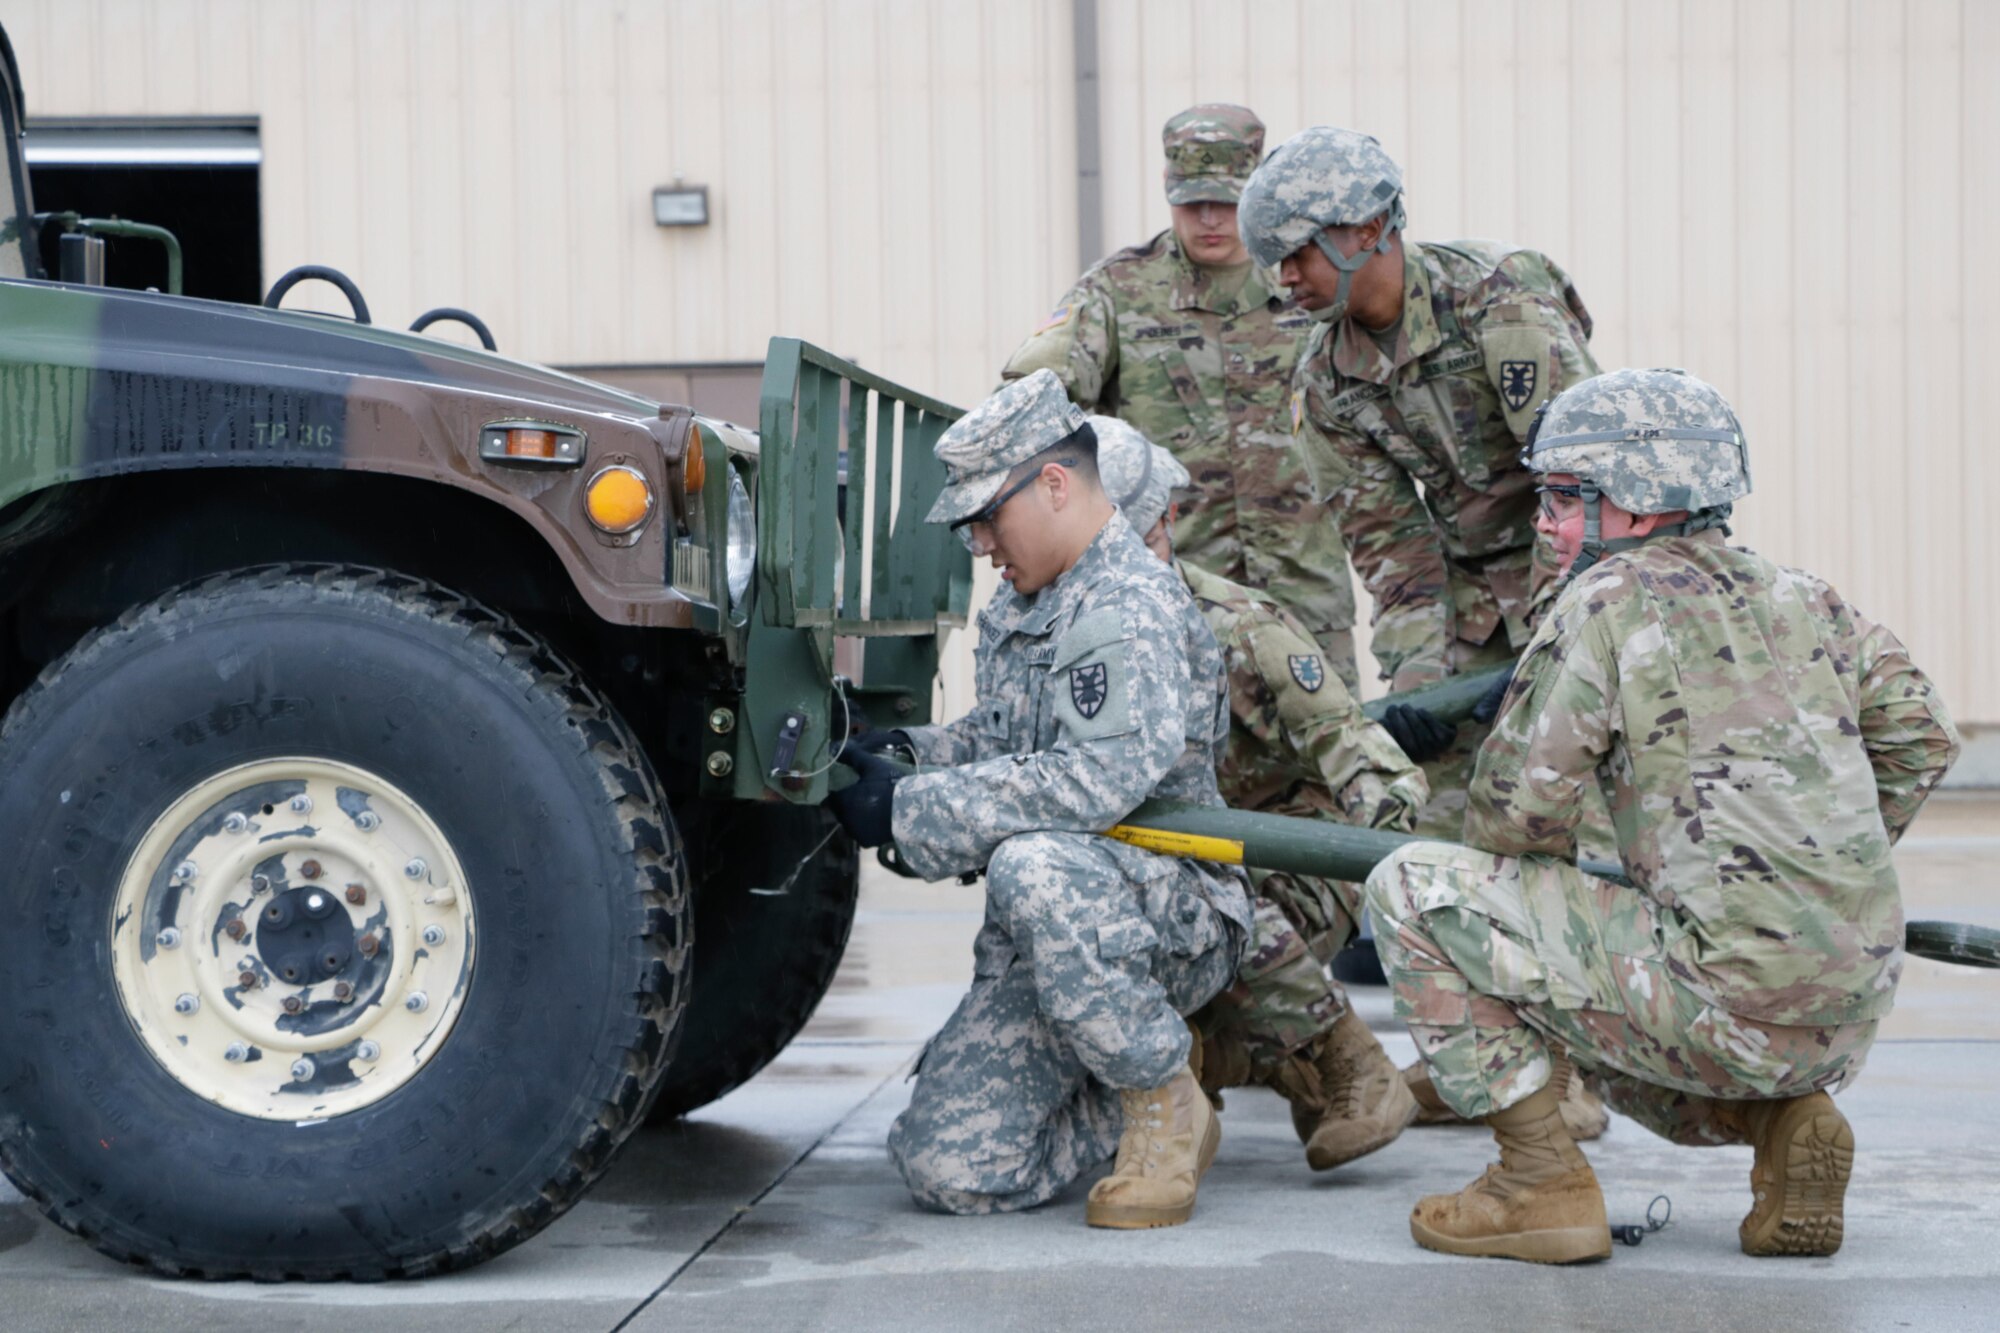 U.S. Army Soldiers from the 558th Transportation Company, 10th Transportation Battalion, 7th Transportation Brigade (Expeditionary) perform vehicle recovery in two High Mobility Multipurpose Wheeled Vehicles during the company’s first “Maintenance Rodeo” competition at Third Port, Joint Base Langley-Eustis, Va., Sept. 19, 2017.